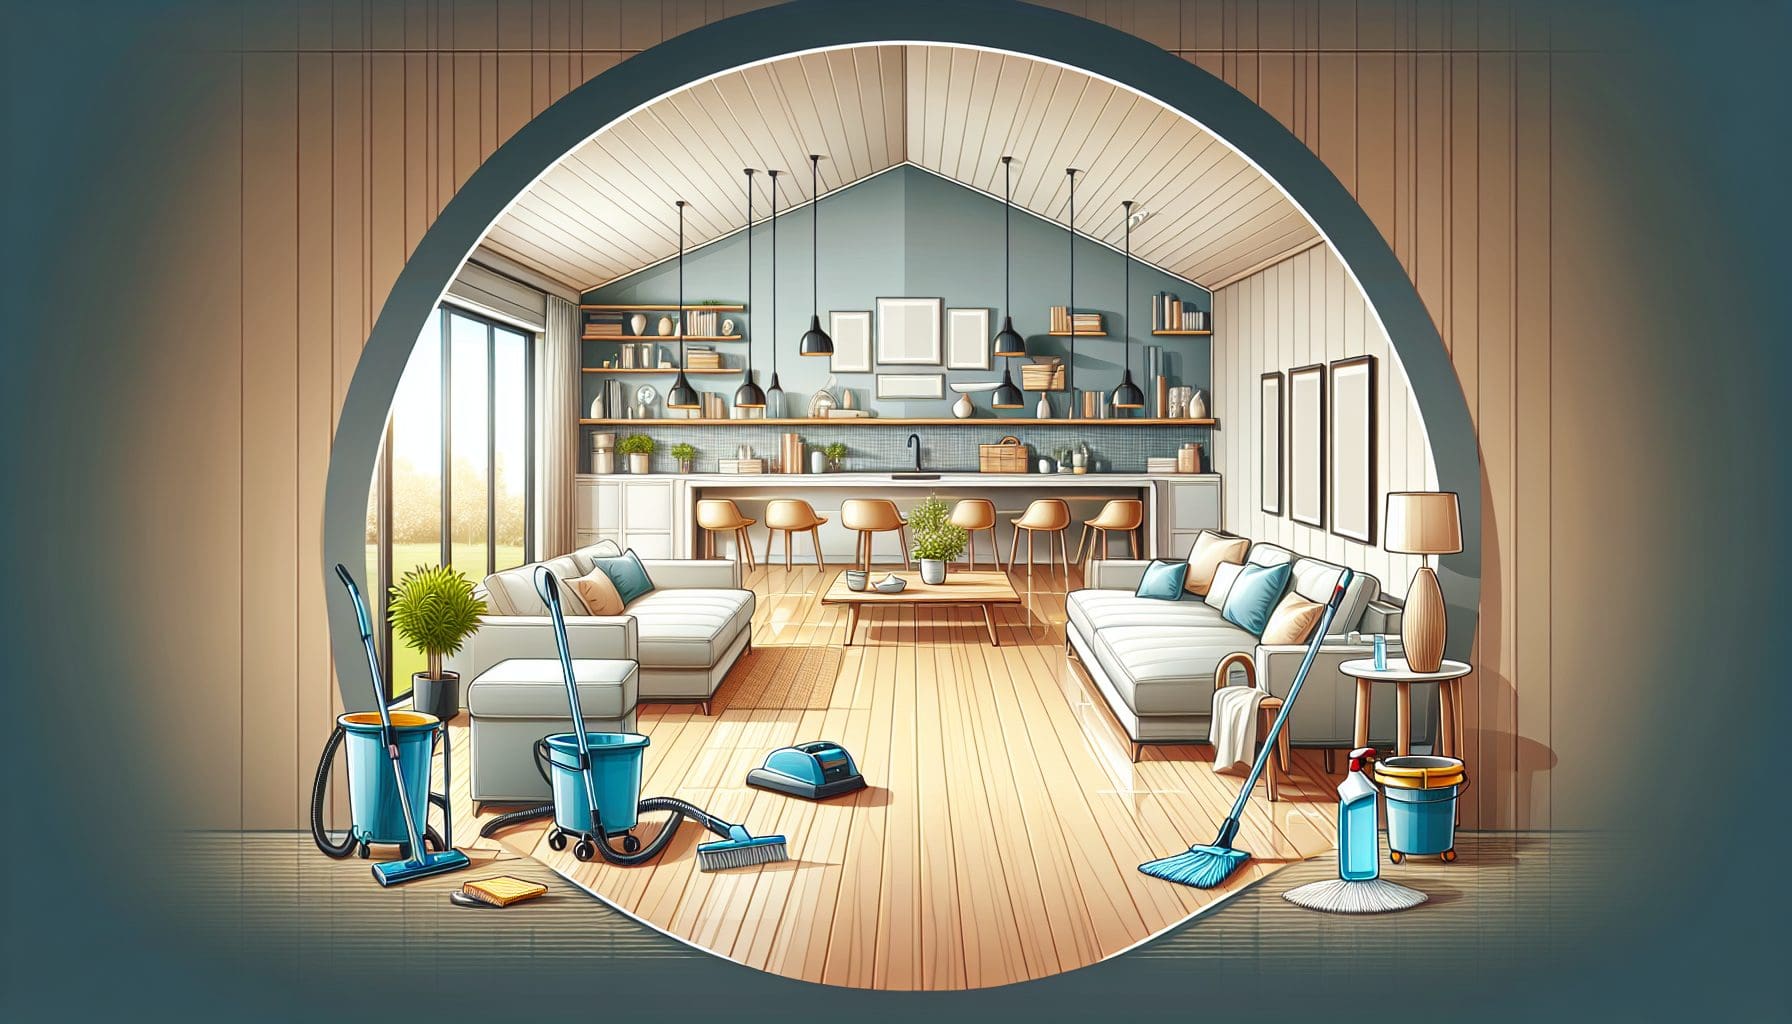 A room with a circular arch and a living room with a couch and mops and a kitchen